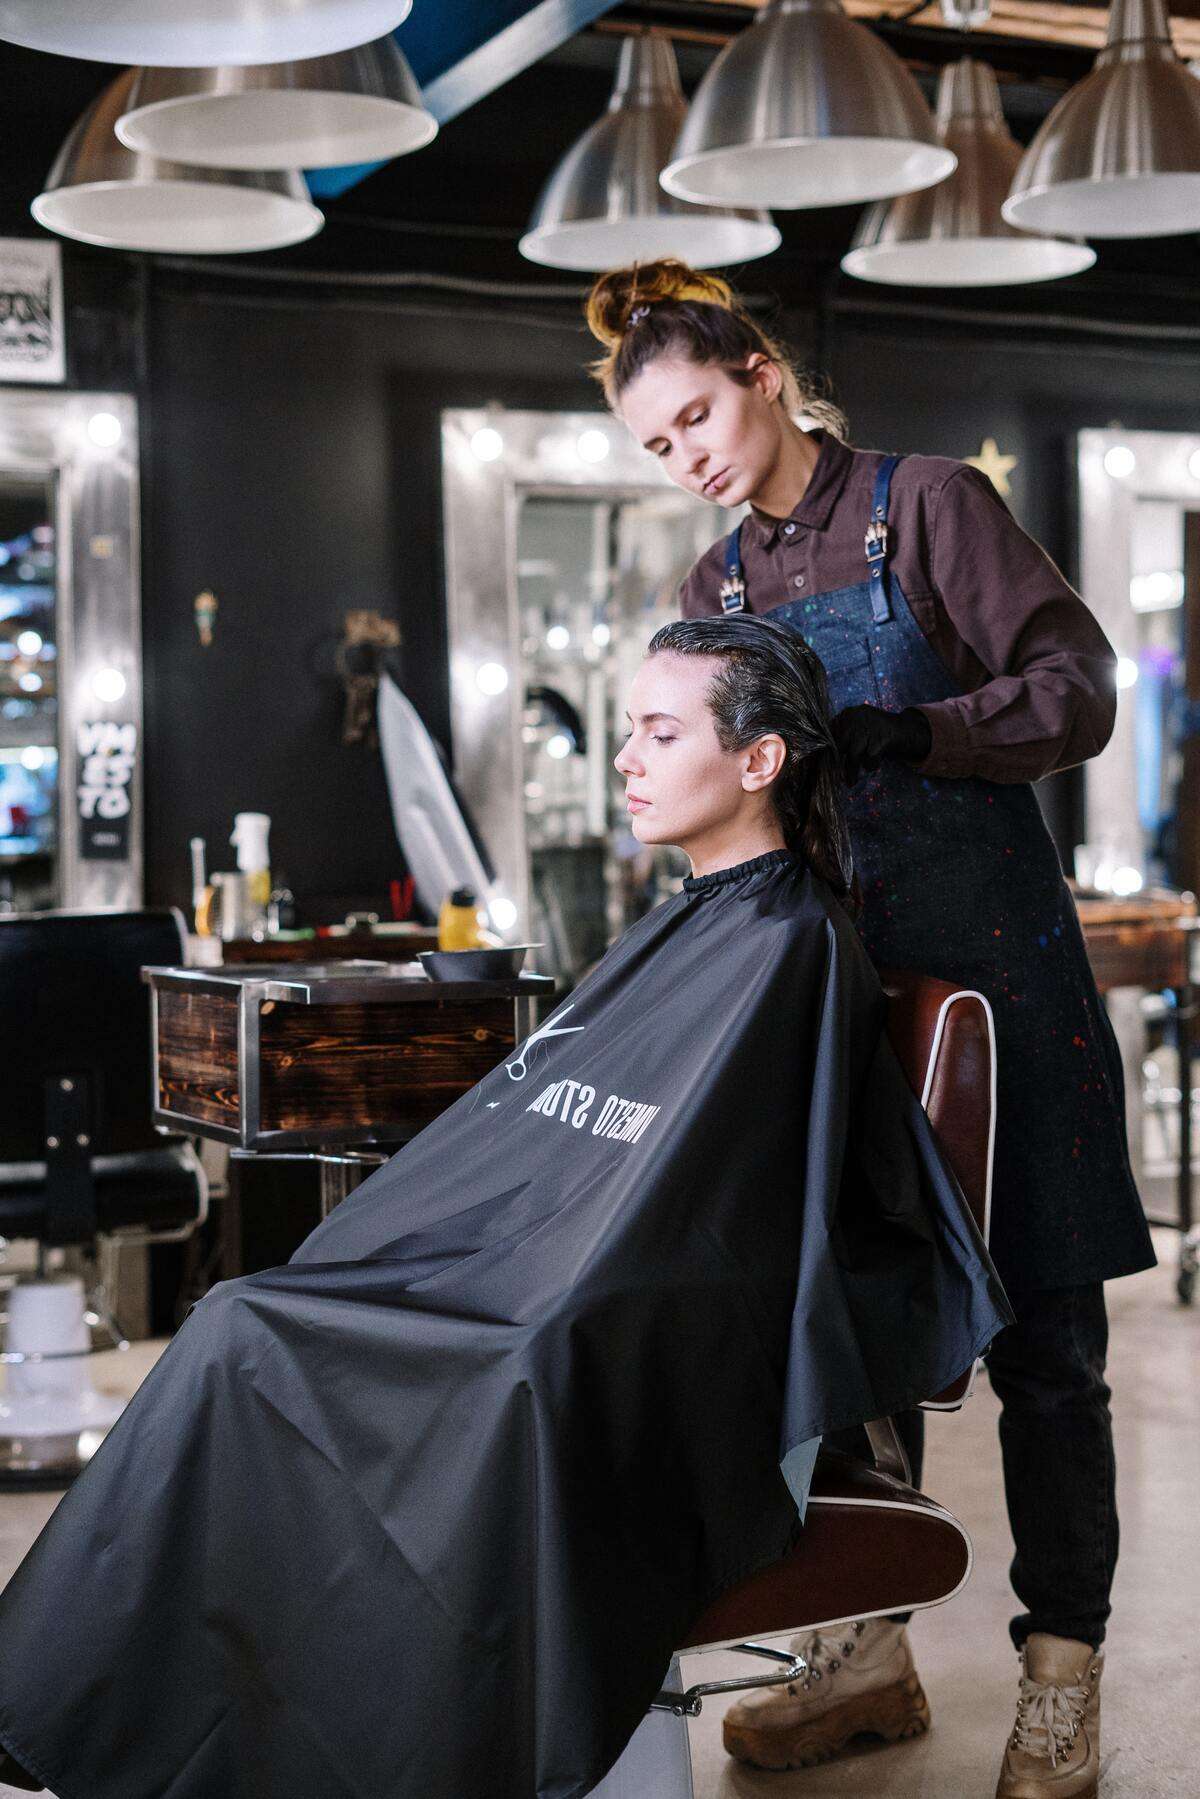 How To Start A Profitable Hairdressing Business